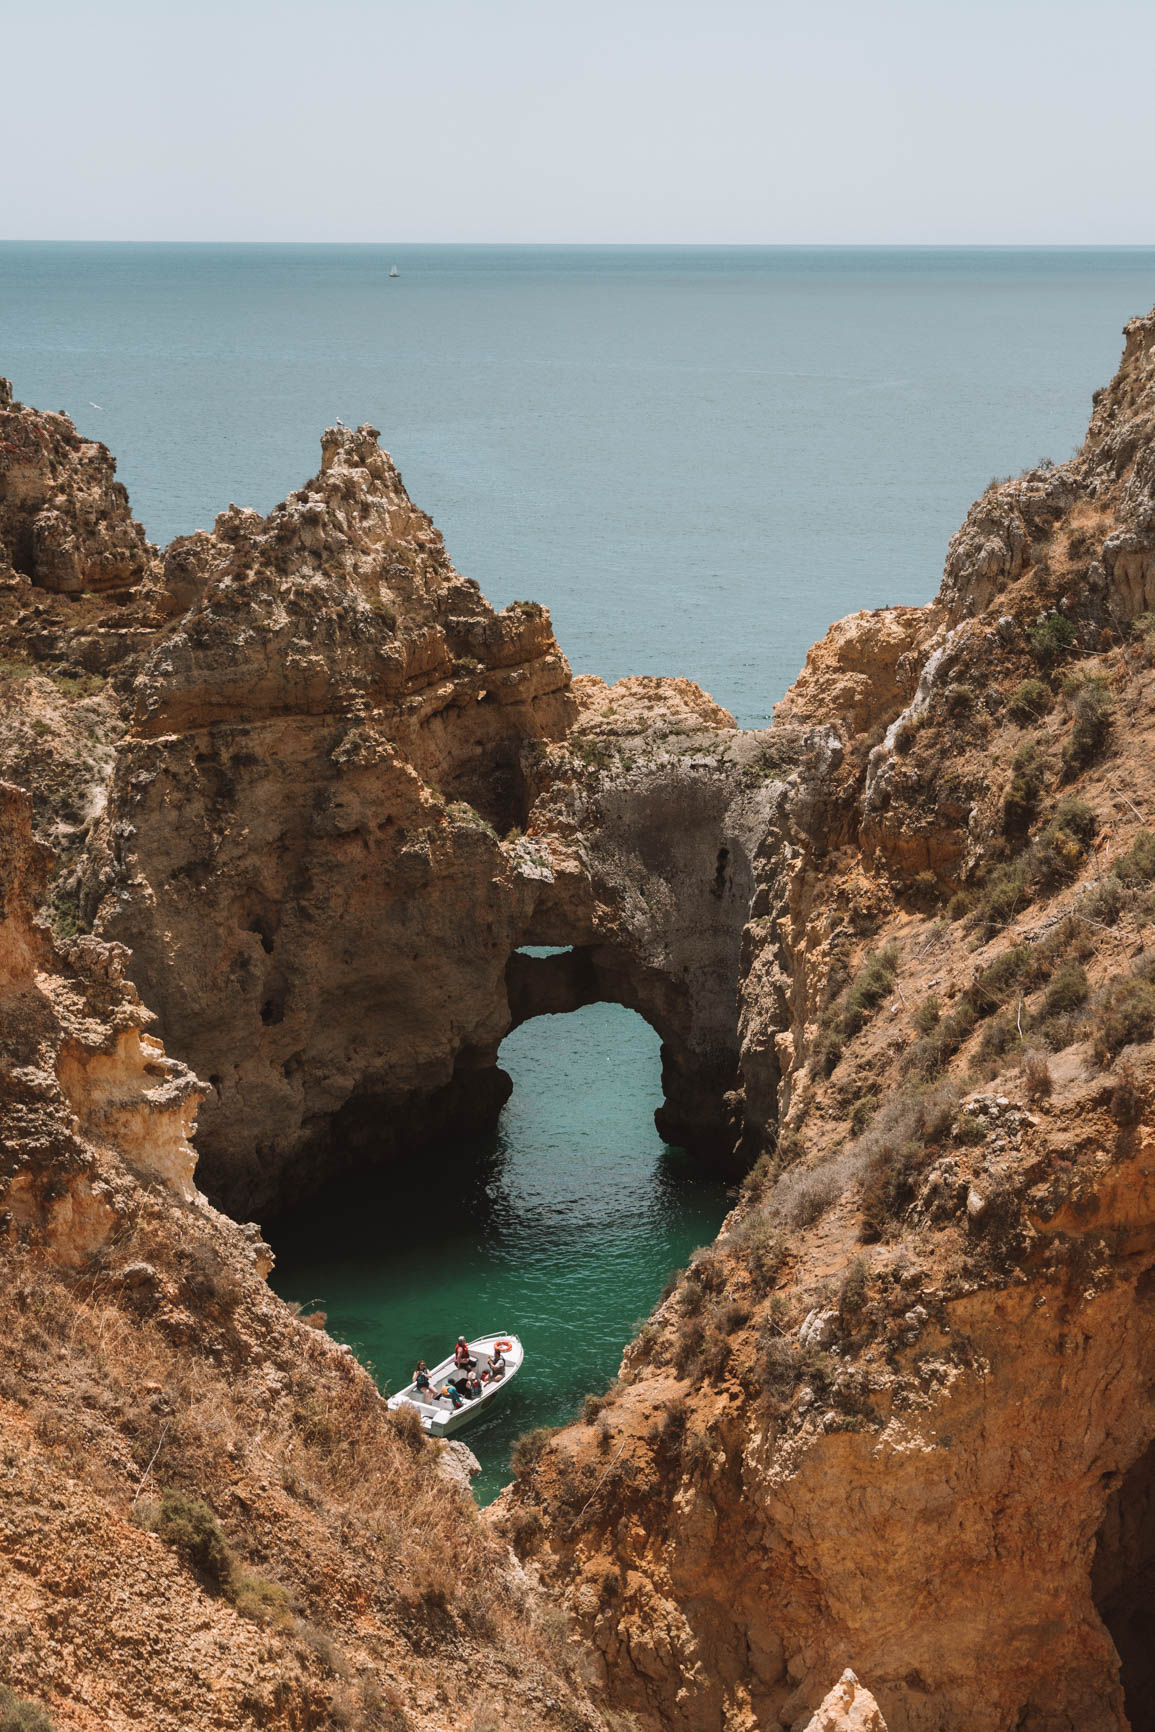 Guide to Lagos Algarve Portugal. Itinerary to Lagos #Portugal #Europe